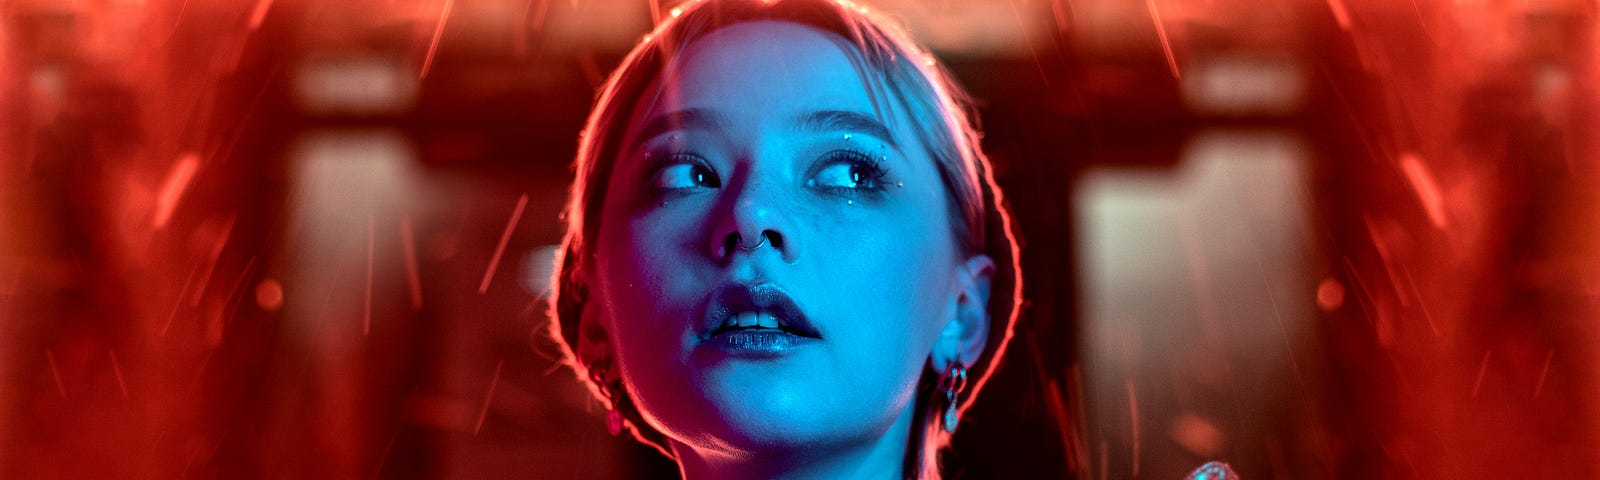 A woman is standing below bright red neon lights. She has a short blond hair, is wearing a black shirt and is holding a shoe.